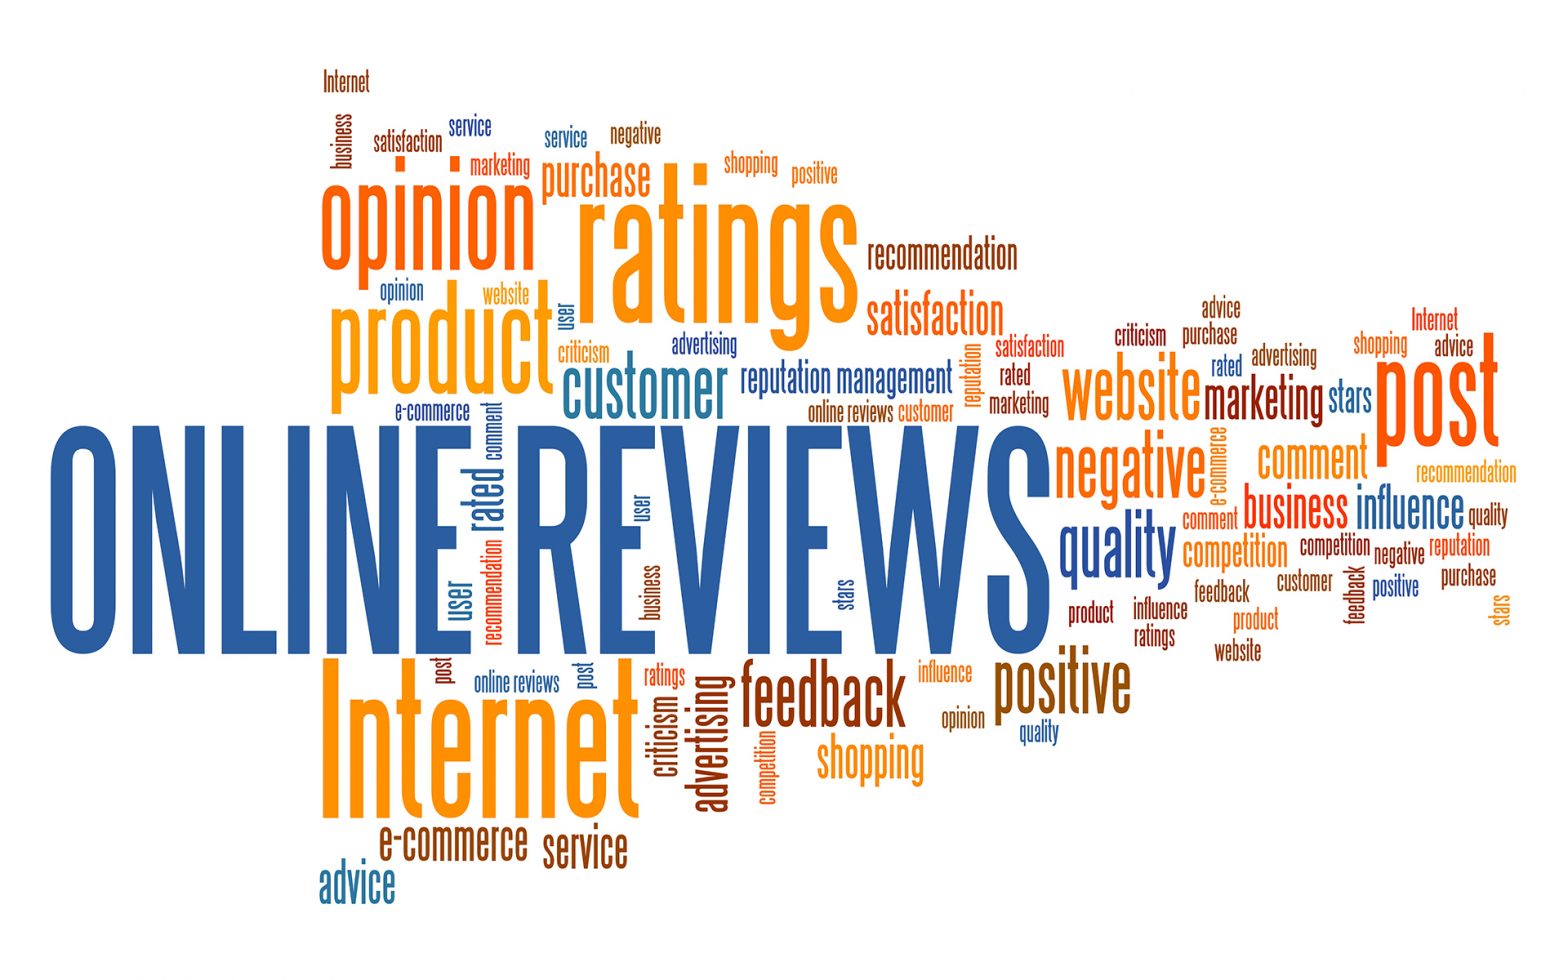 10 Tips for responding to negative online reviews